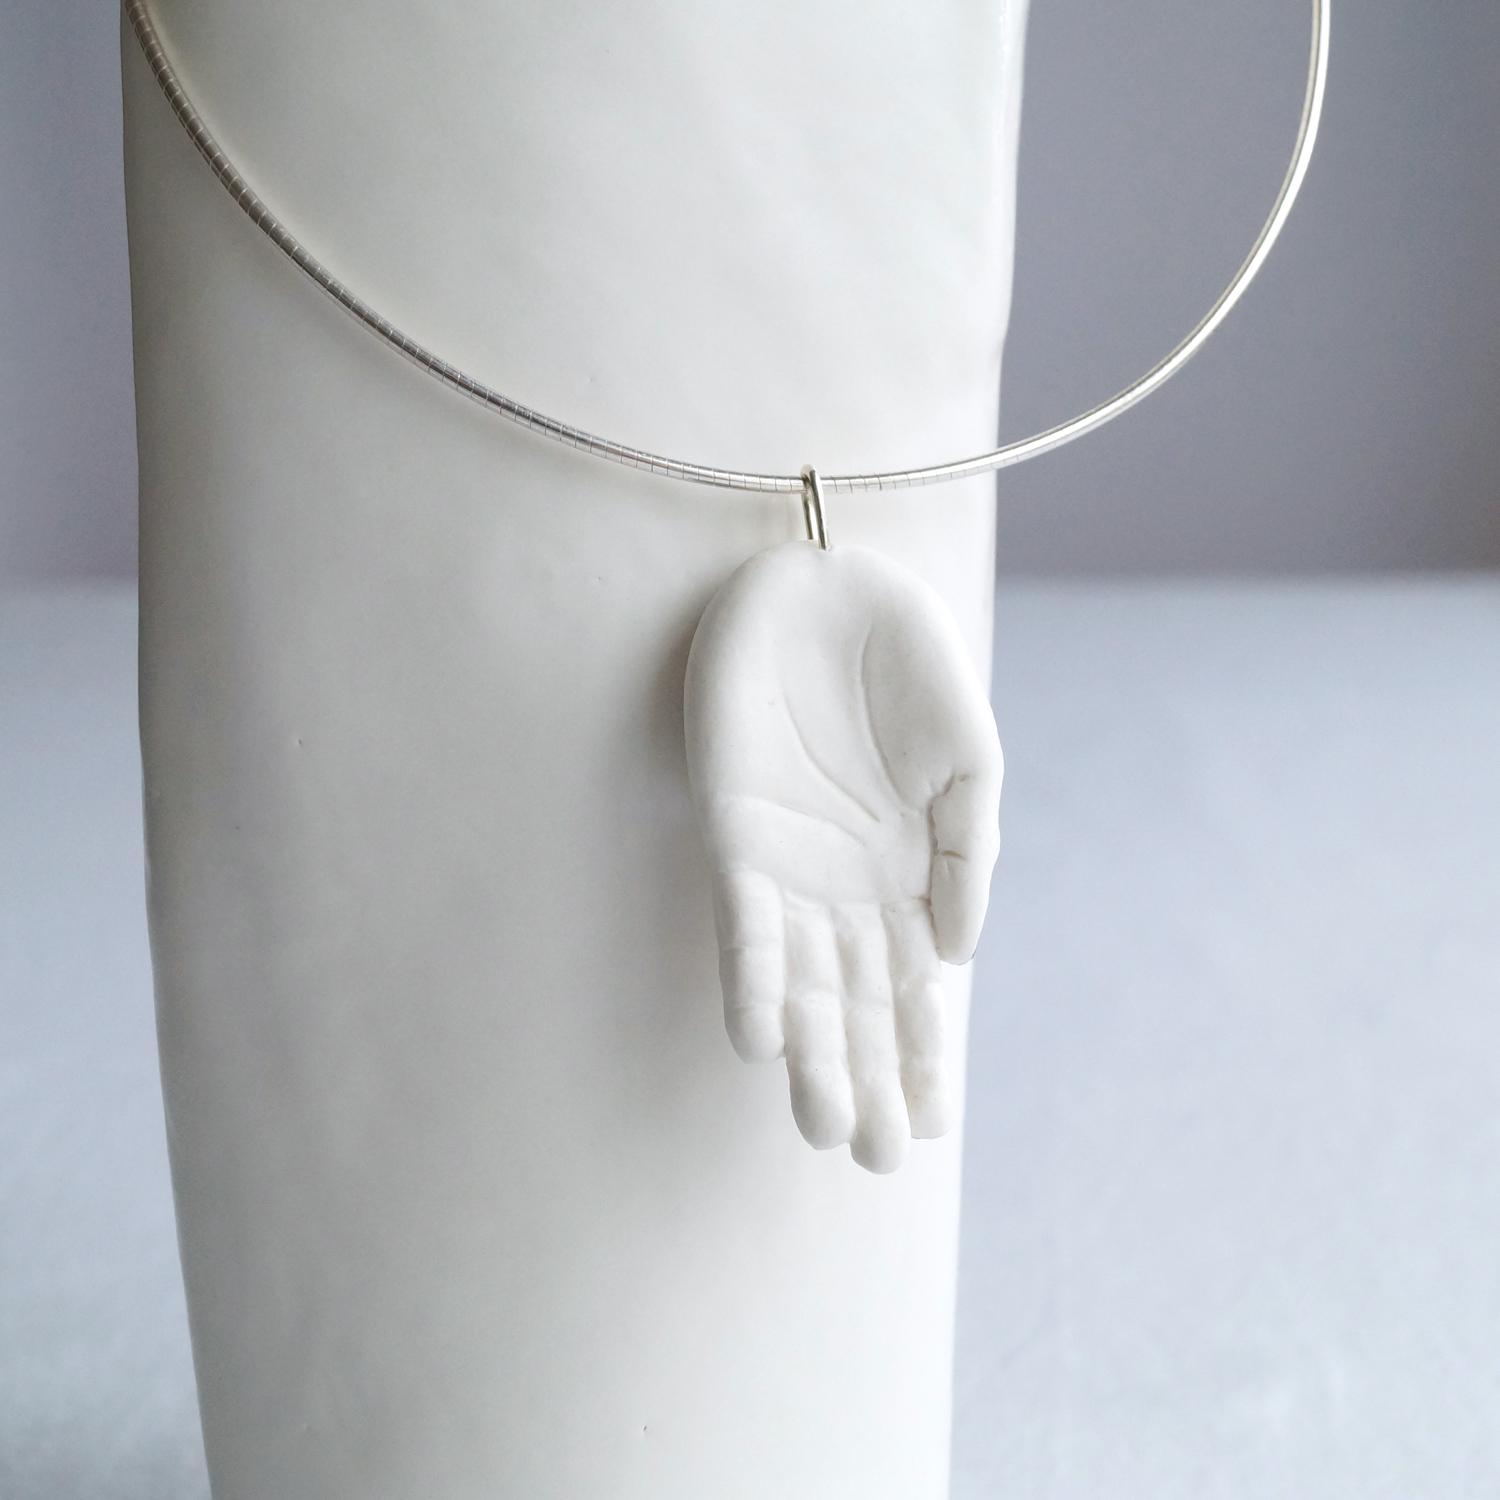 White porcelain hand necklace, hand jewellery, sculpted hand, platinum lustre nails, craft worker gift, white porcelain gift, 18th wedding anniversary, birthday gift, 925 sterling silver, snake chain, omega necklet, 18th anniversary gift for women, 18th anniversary porcelain jewellery, 18th anniversary porcelain necklace, first anniversary paper, 1st paper gift, Valentines day gift, 18th anniversary porcelain necklace, UK, native american hand peace sign,